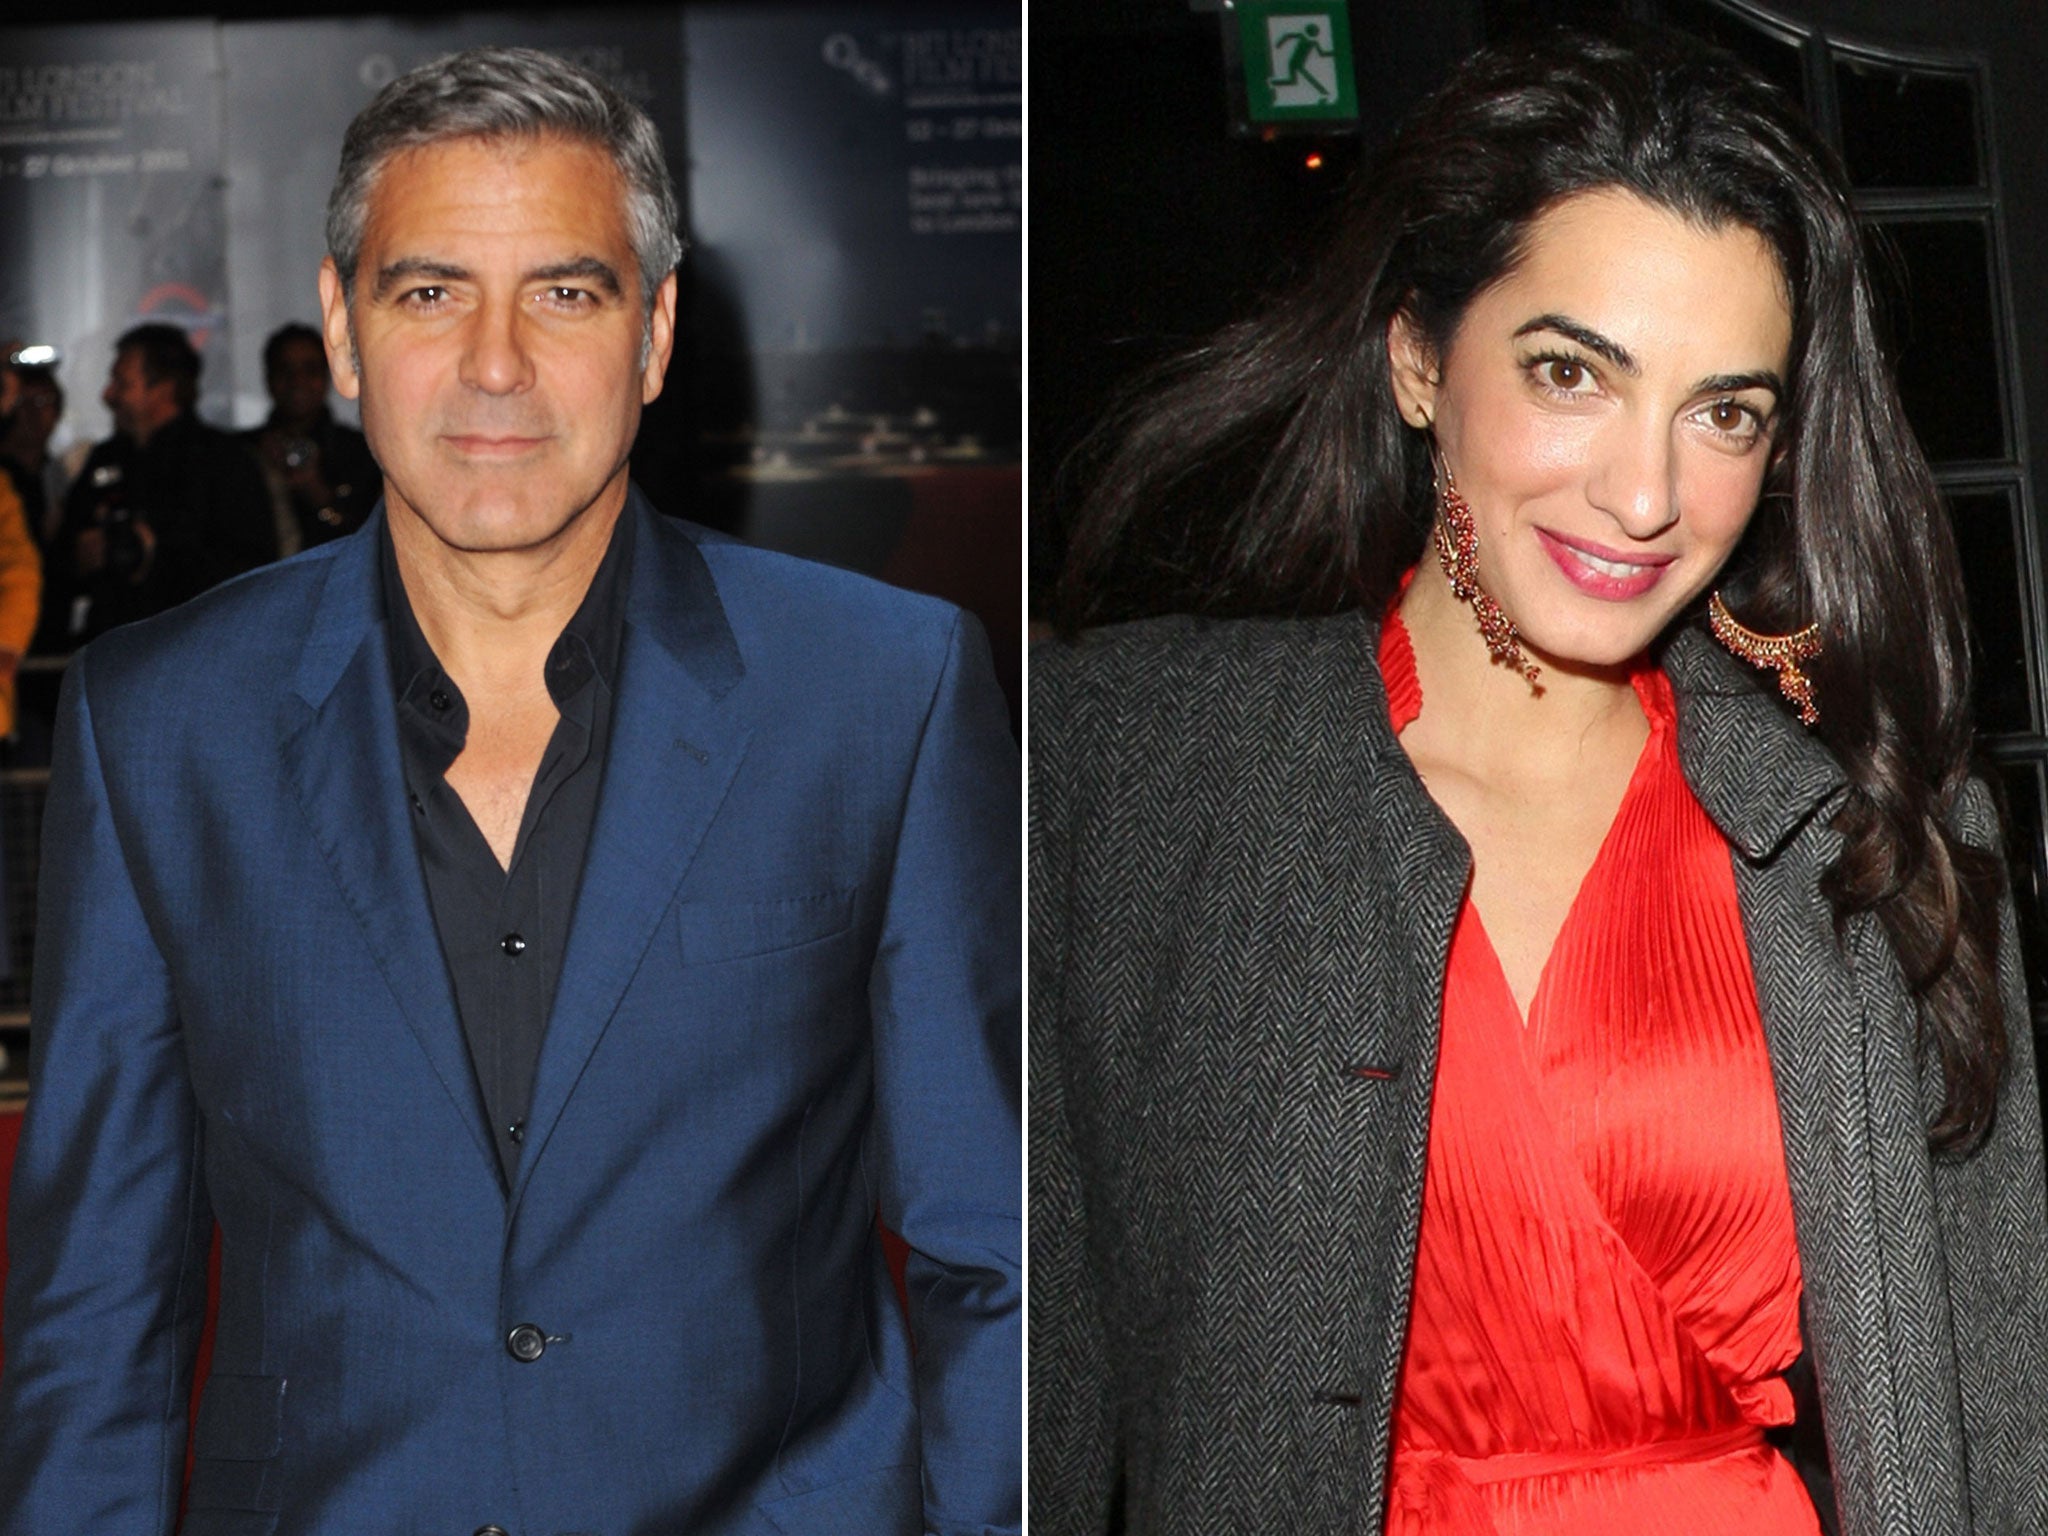 George Clooney engaged to Amal Alamuddin: Actor to marry 